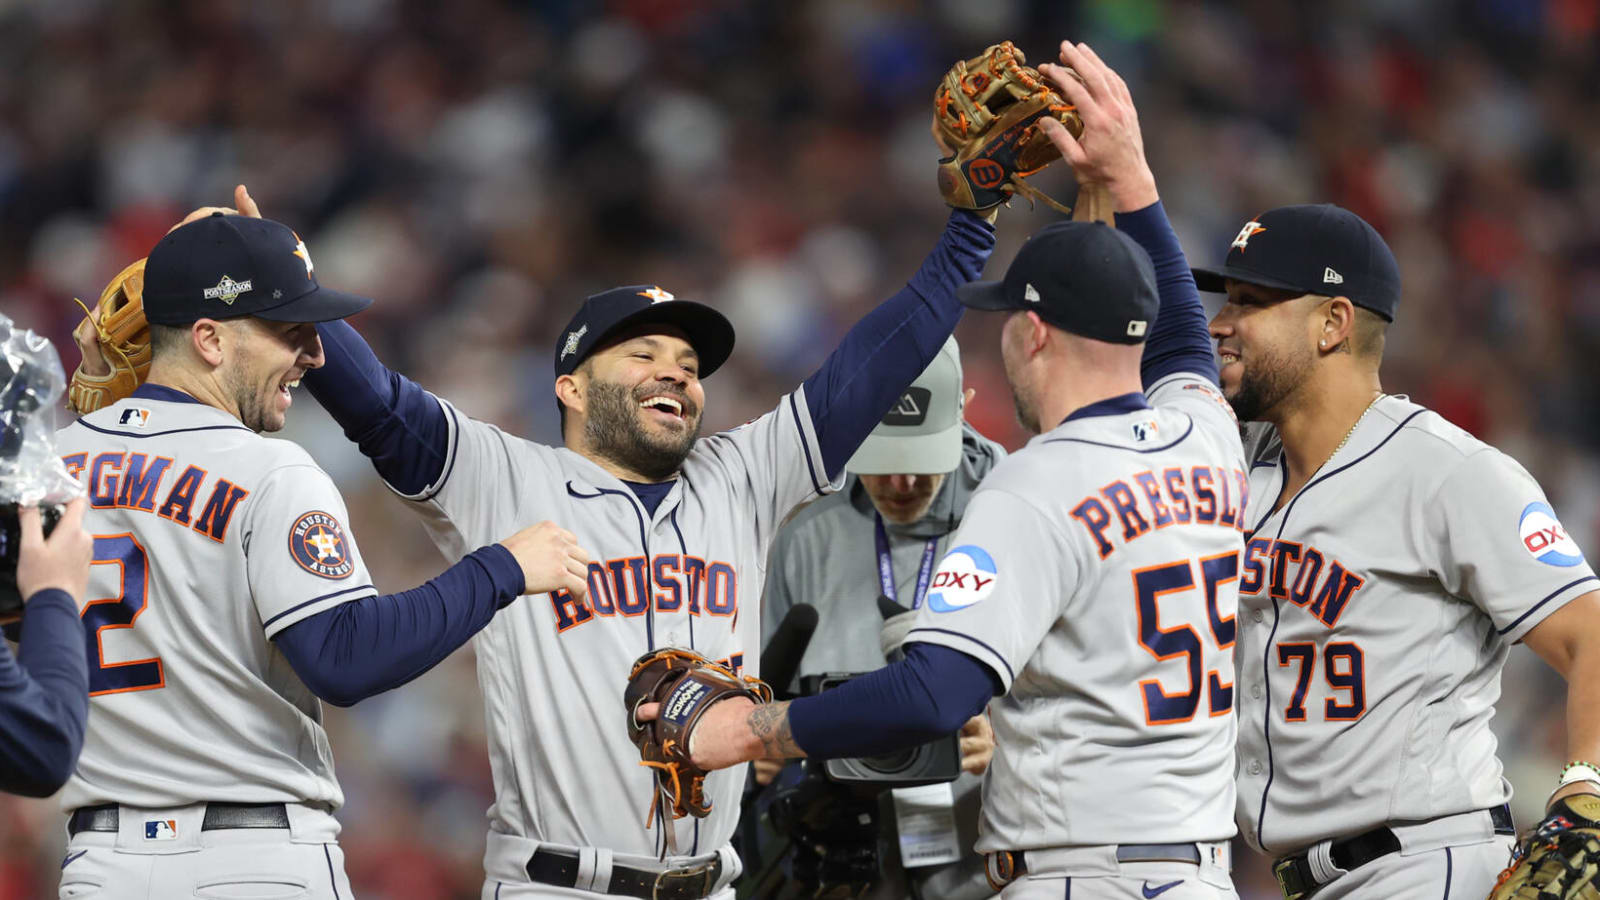 Astros reach ALCS, set stage for all-Texas series